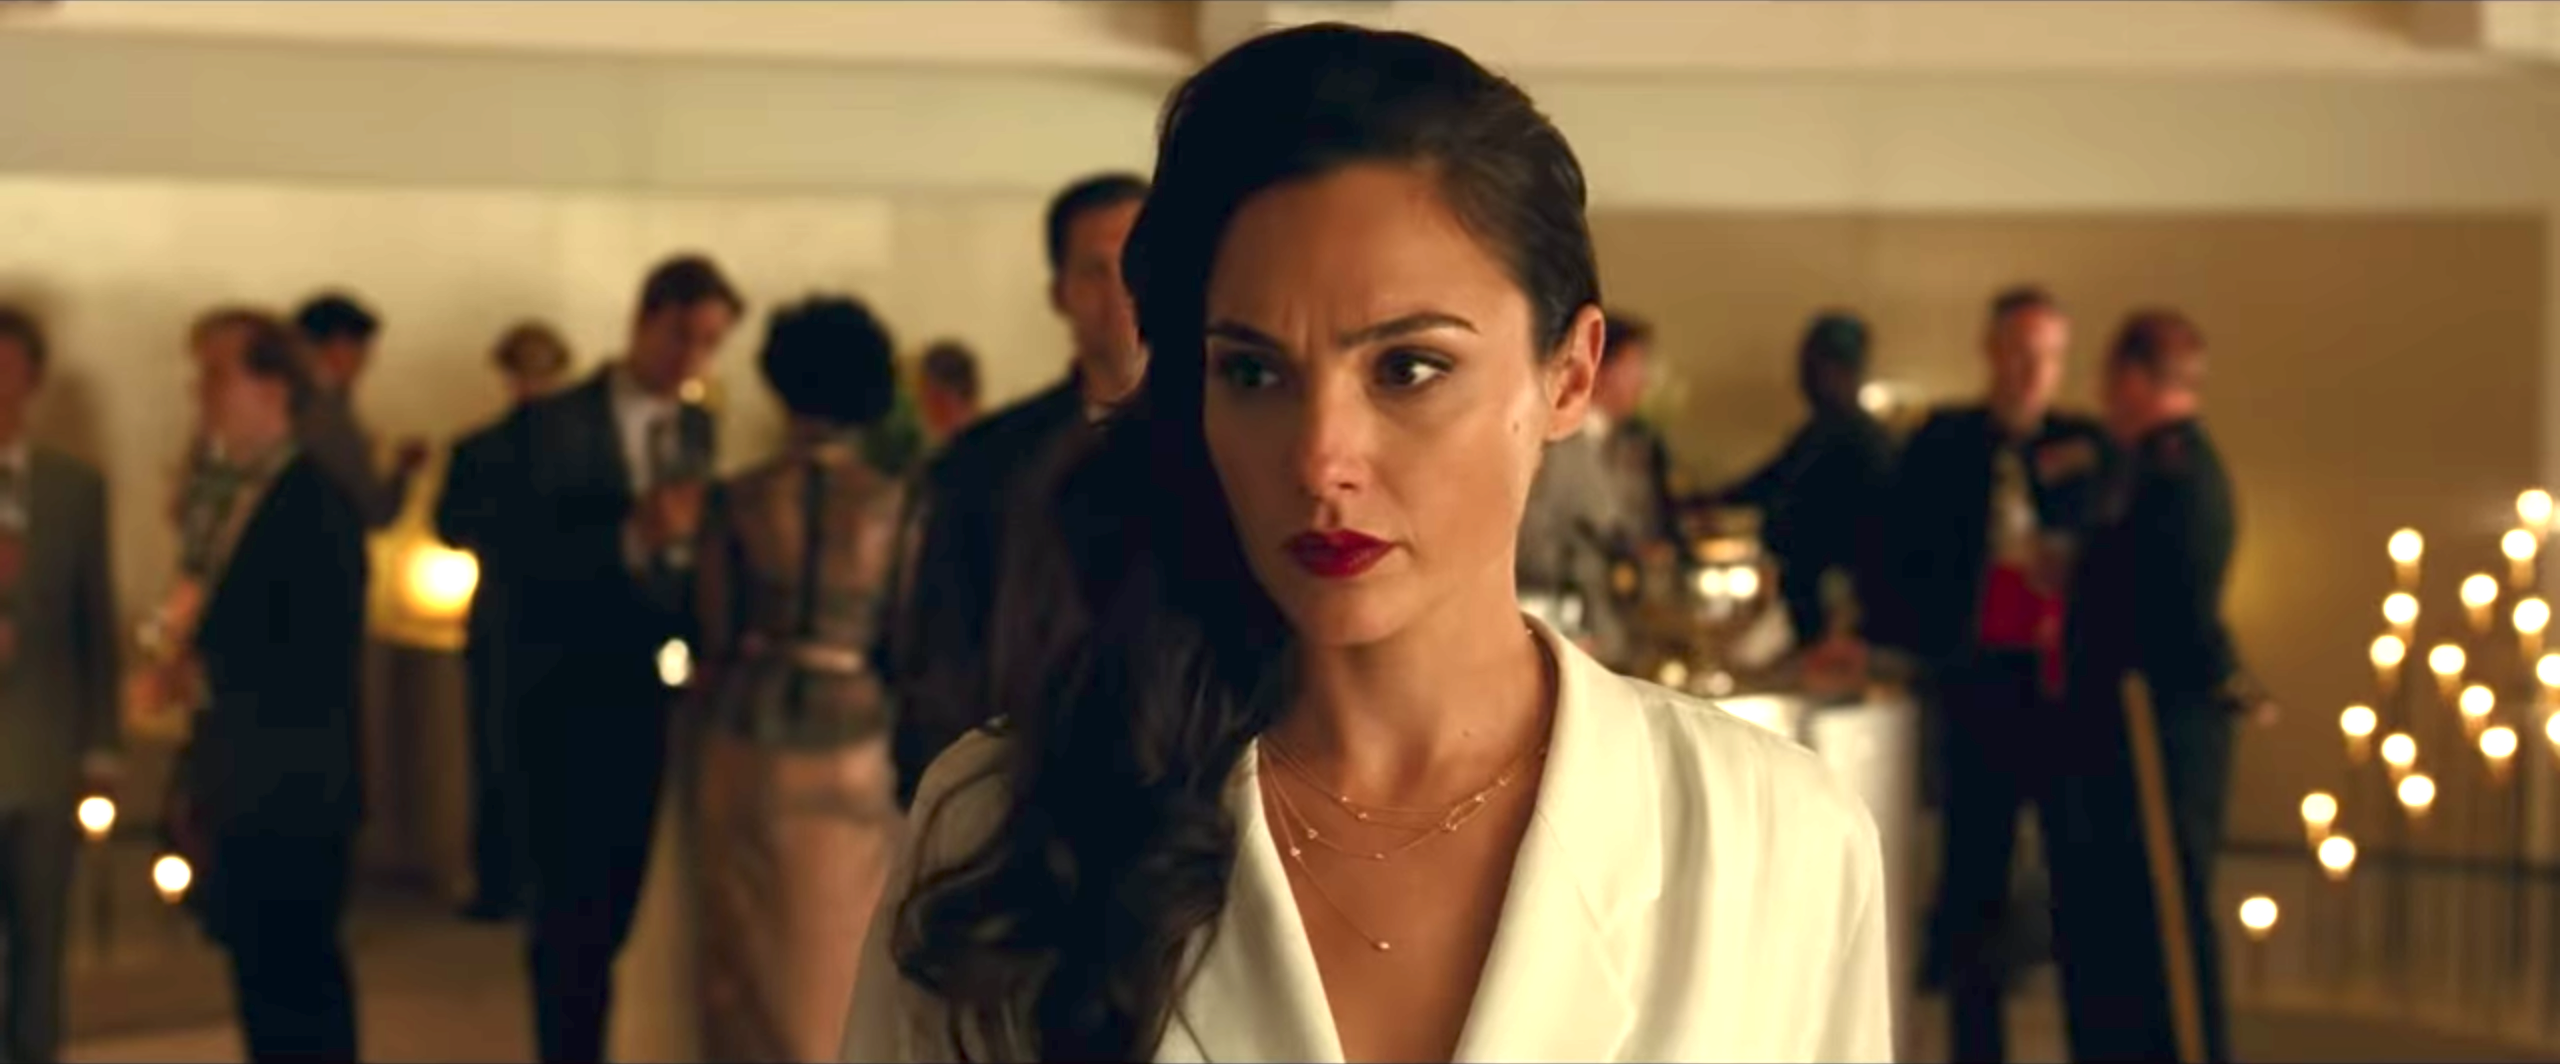 Wonder Woman 1984 White Dress Fashion Dresses Dceu's wonder woman 1984, starring gal gadot, chris pine, pedro pascal and kristin wiig, has several easter eggs and references fans may have etta's advanced age indicates she enjoyed a long life. wonder woman 1984 white dress fashion